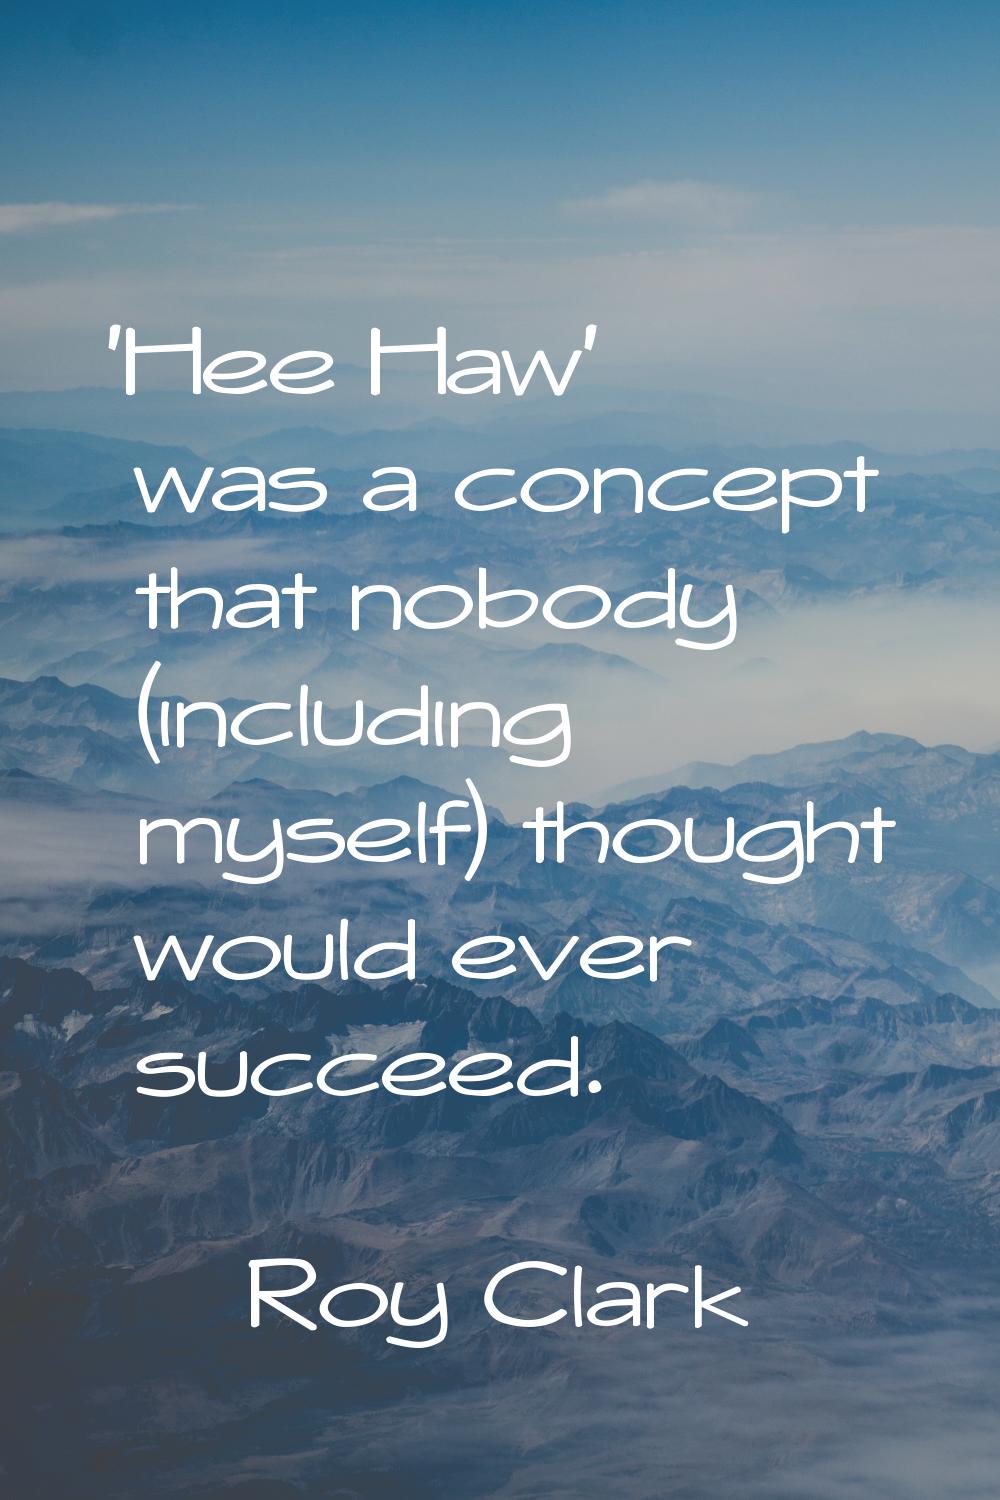 'Hee Haw' was a concept that nobody (including myself) thought would ever succeed.